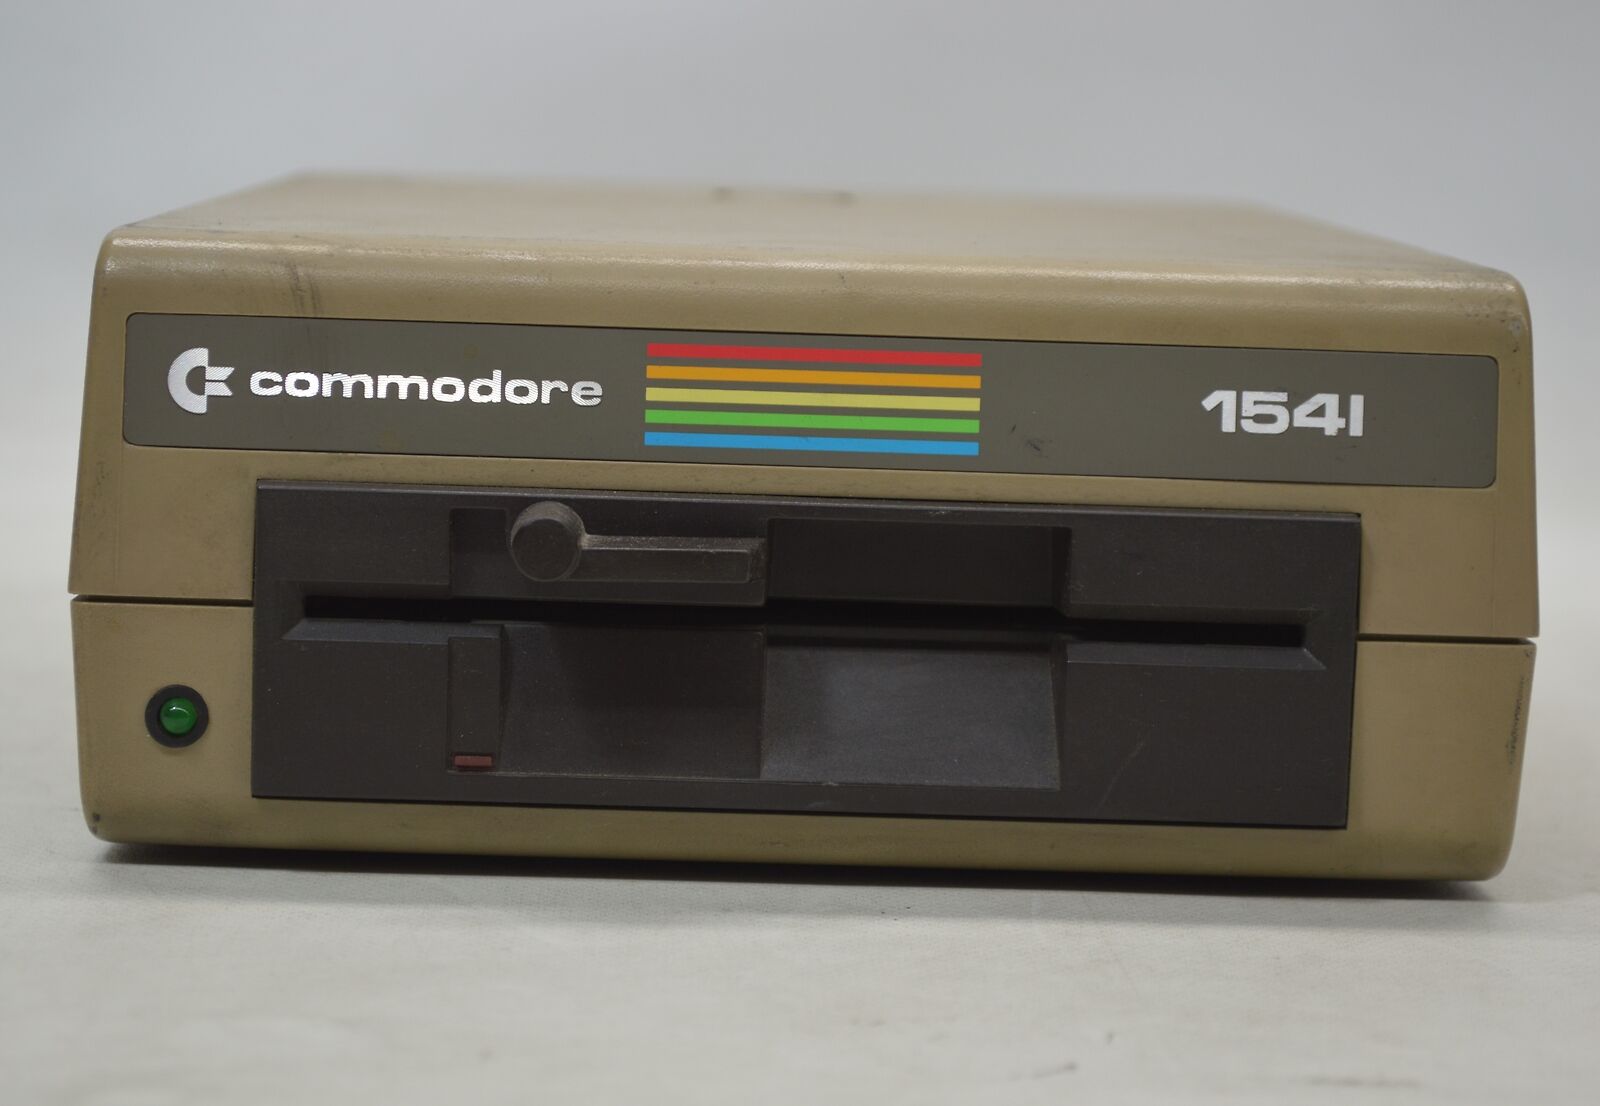 Commodore Floppy Disk Drive Model 1541